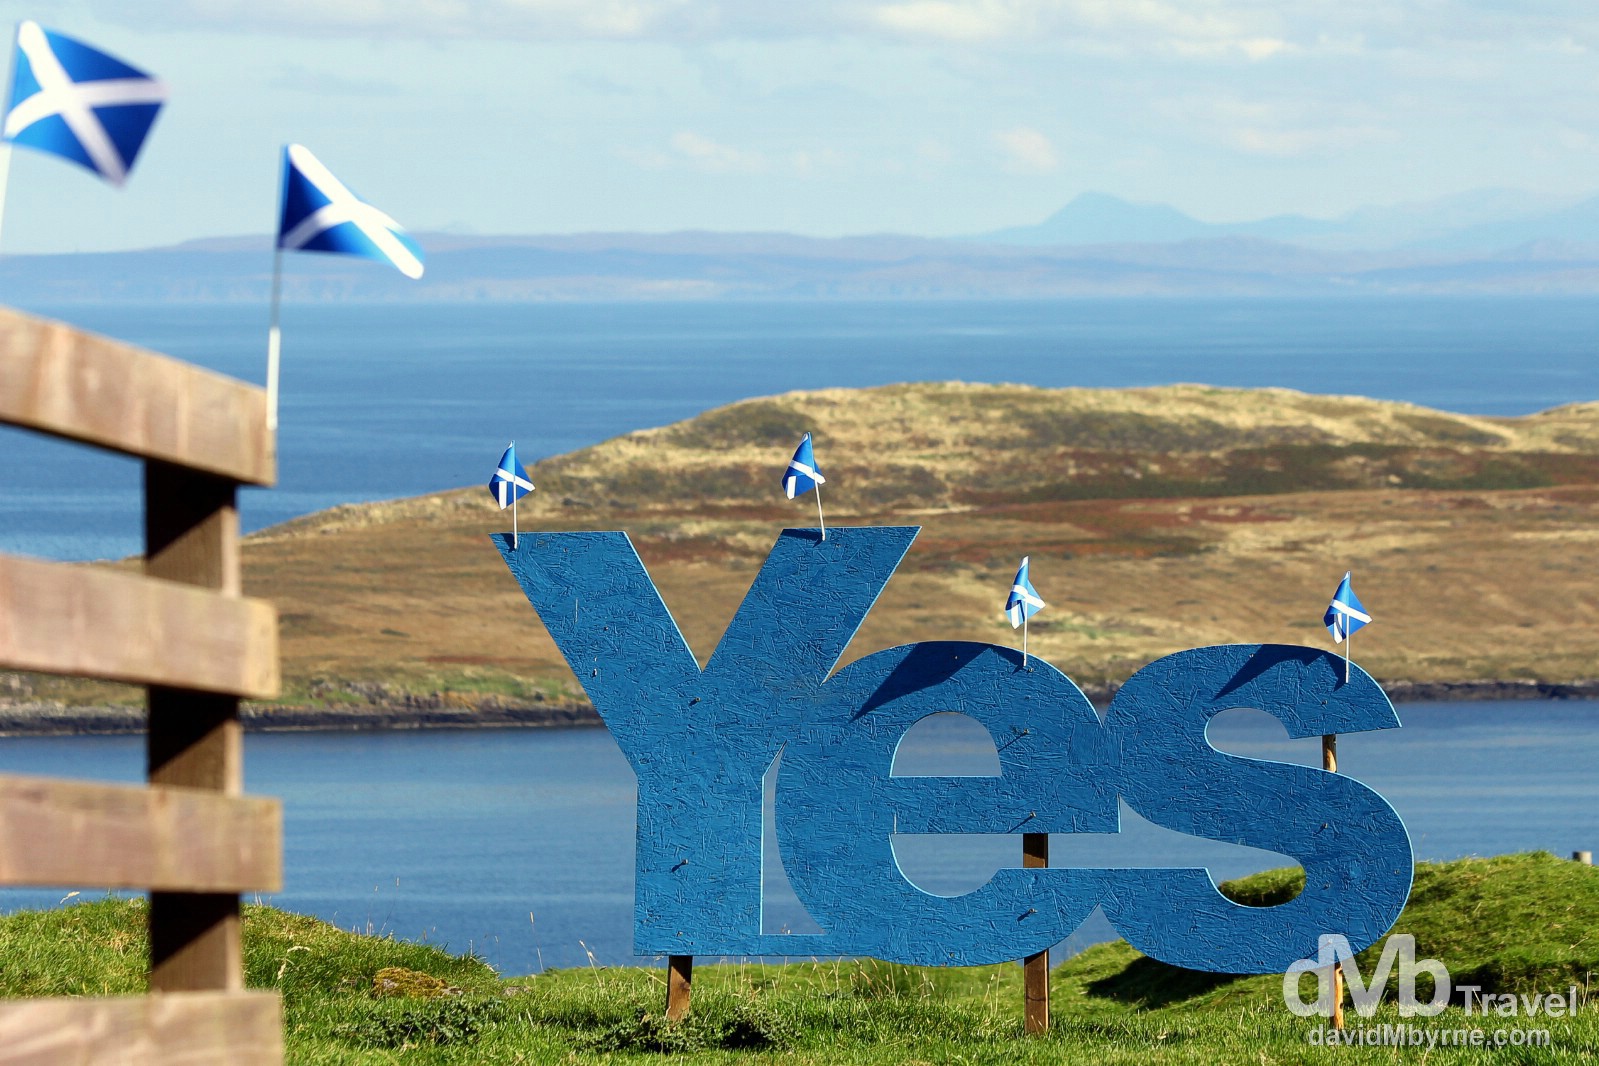 It's a big 'Yes' at the tip of the Trotternish peninsula on the Isle of Skye, Scotland. September 17, 2014.